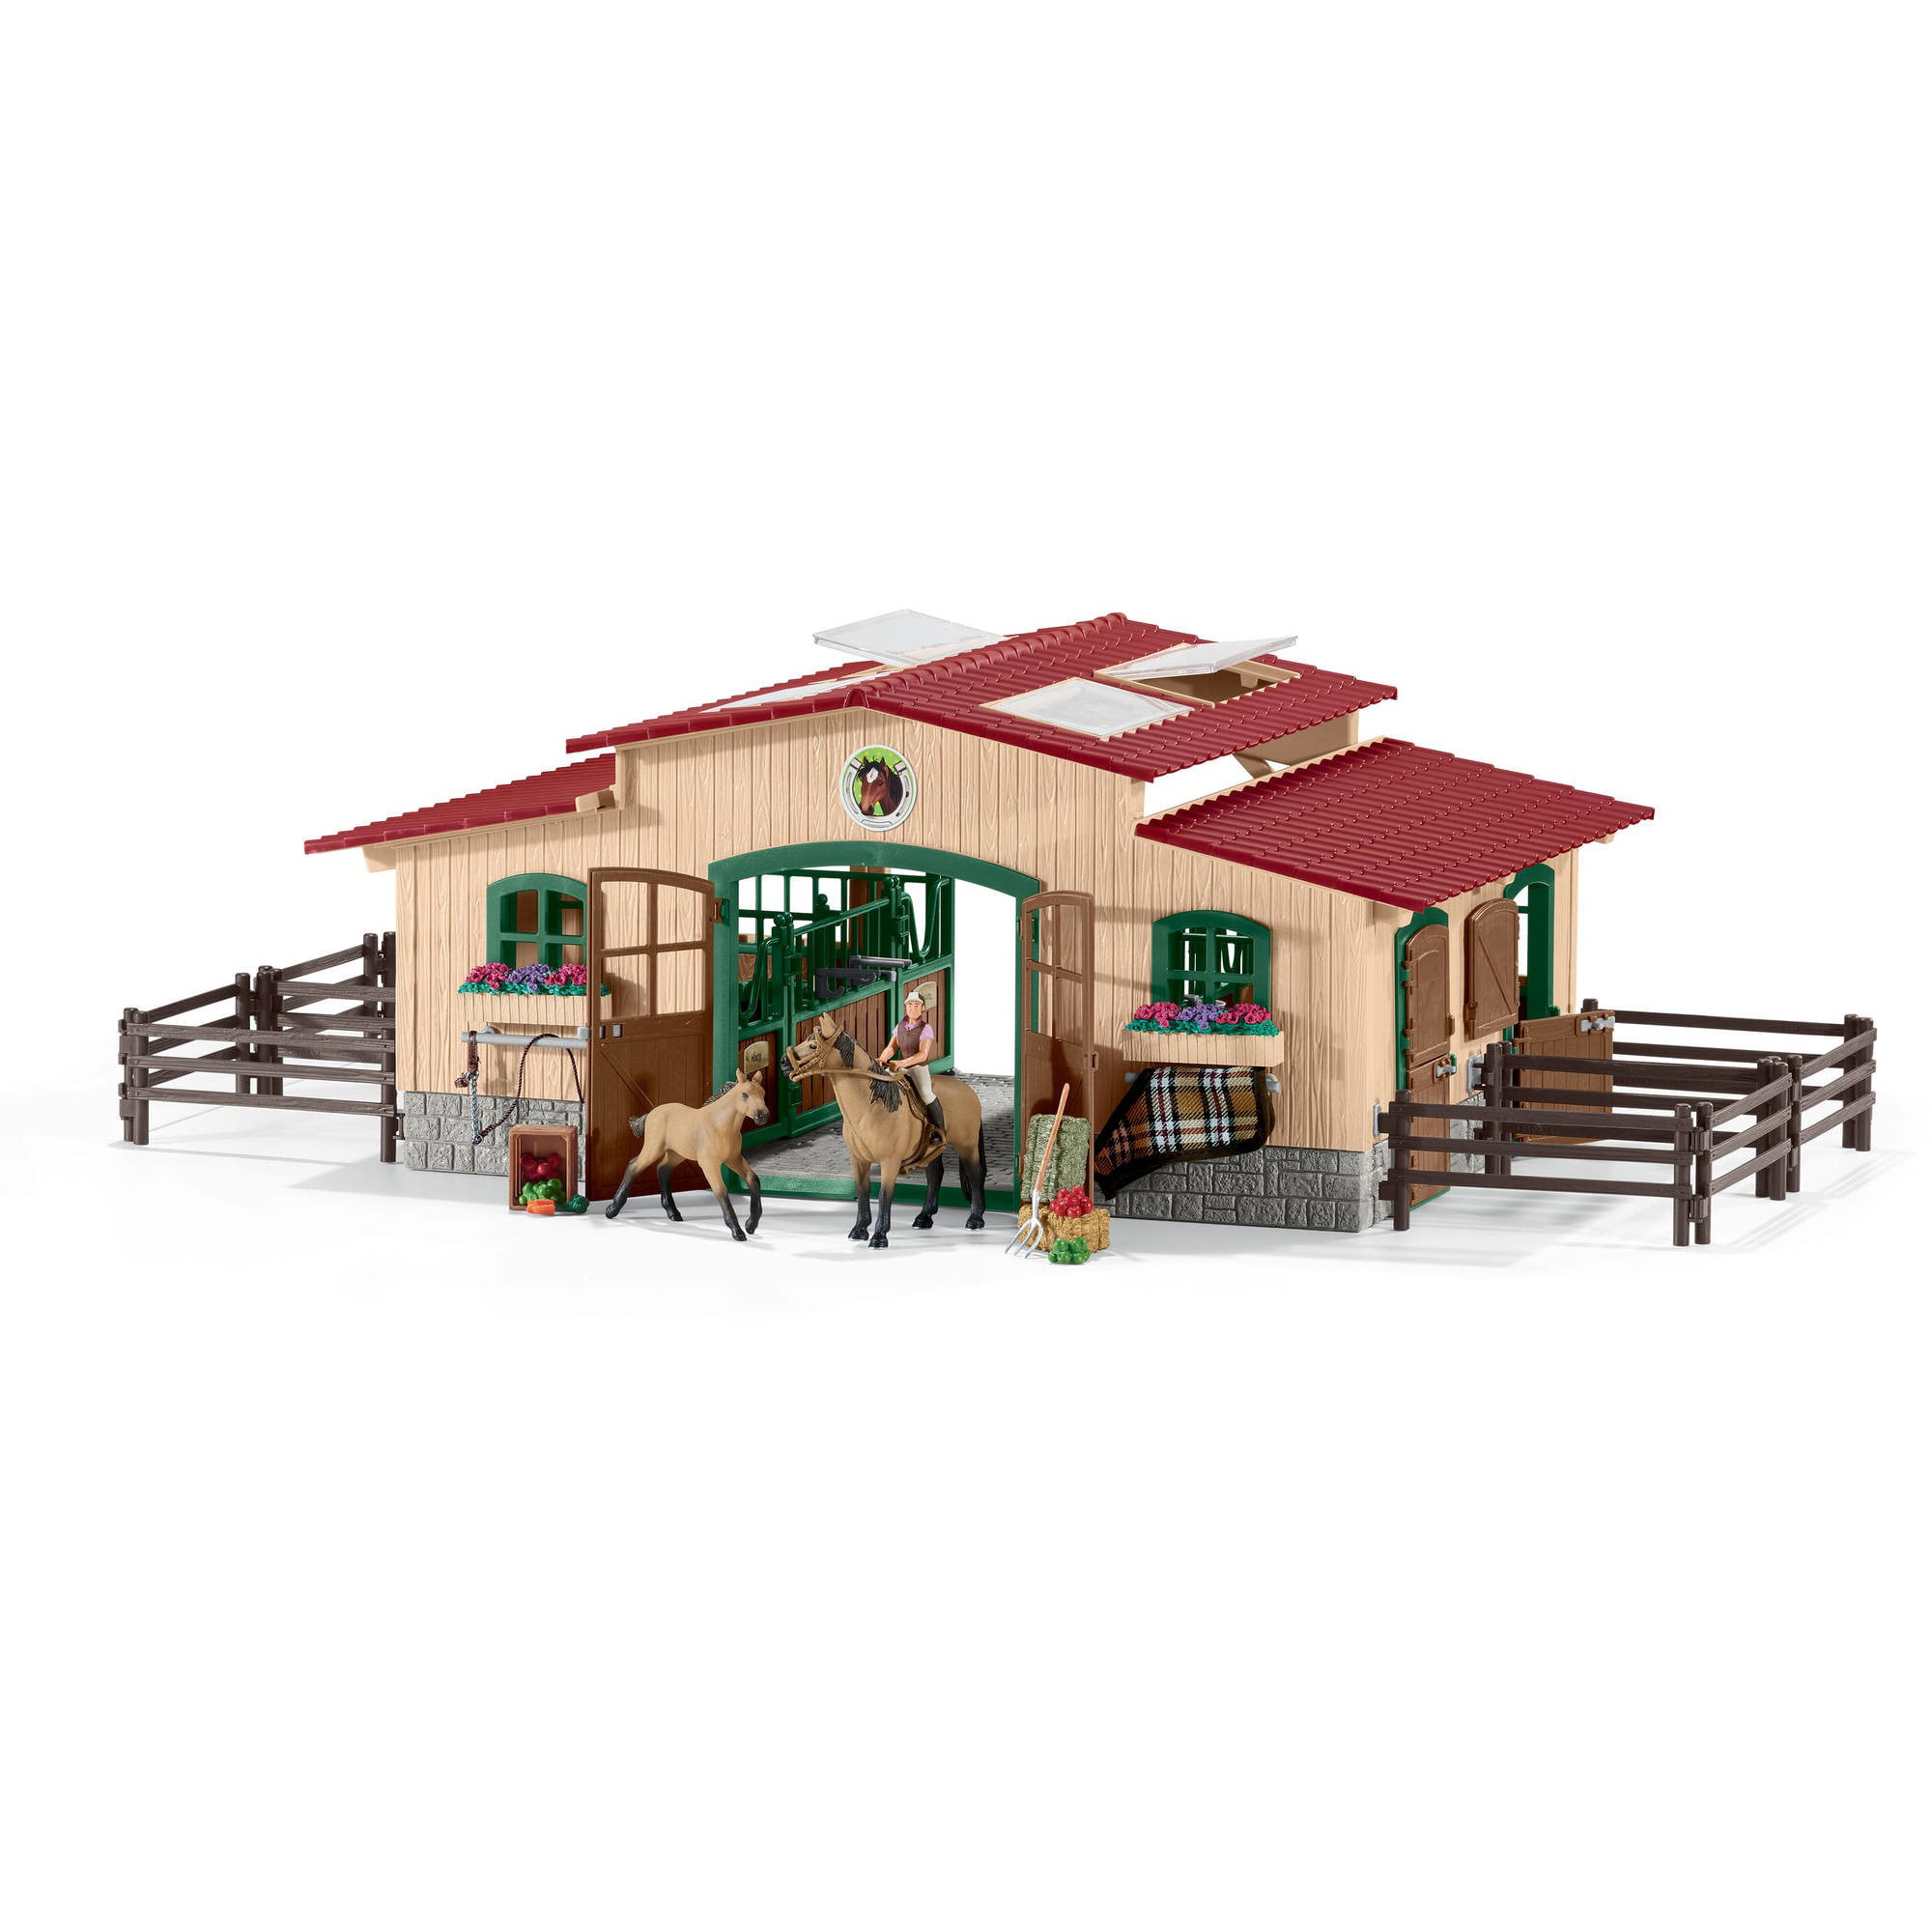 Schleich, Stable with Horses \u0026 